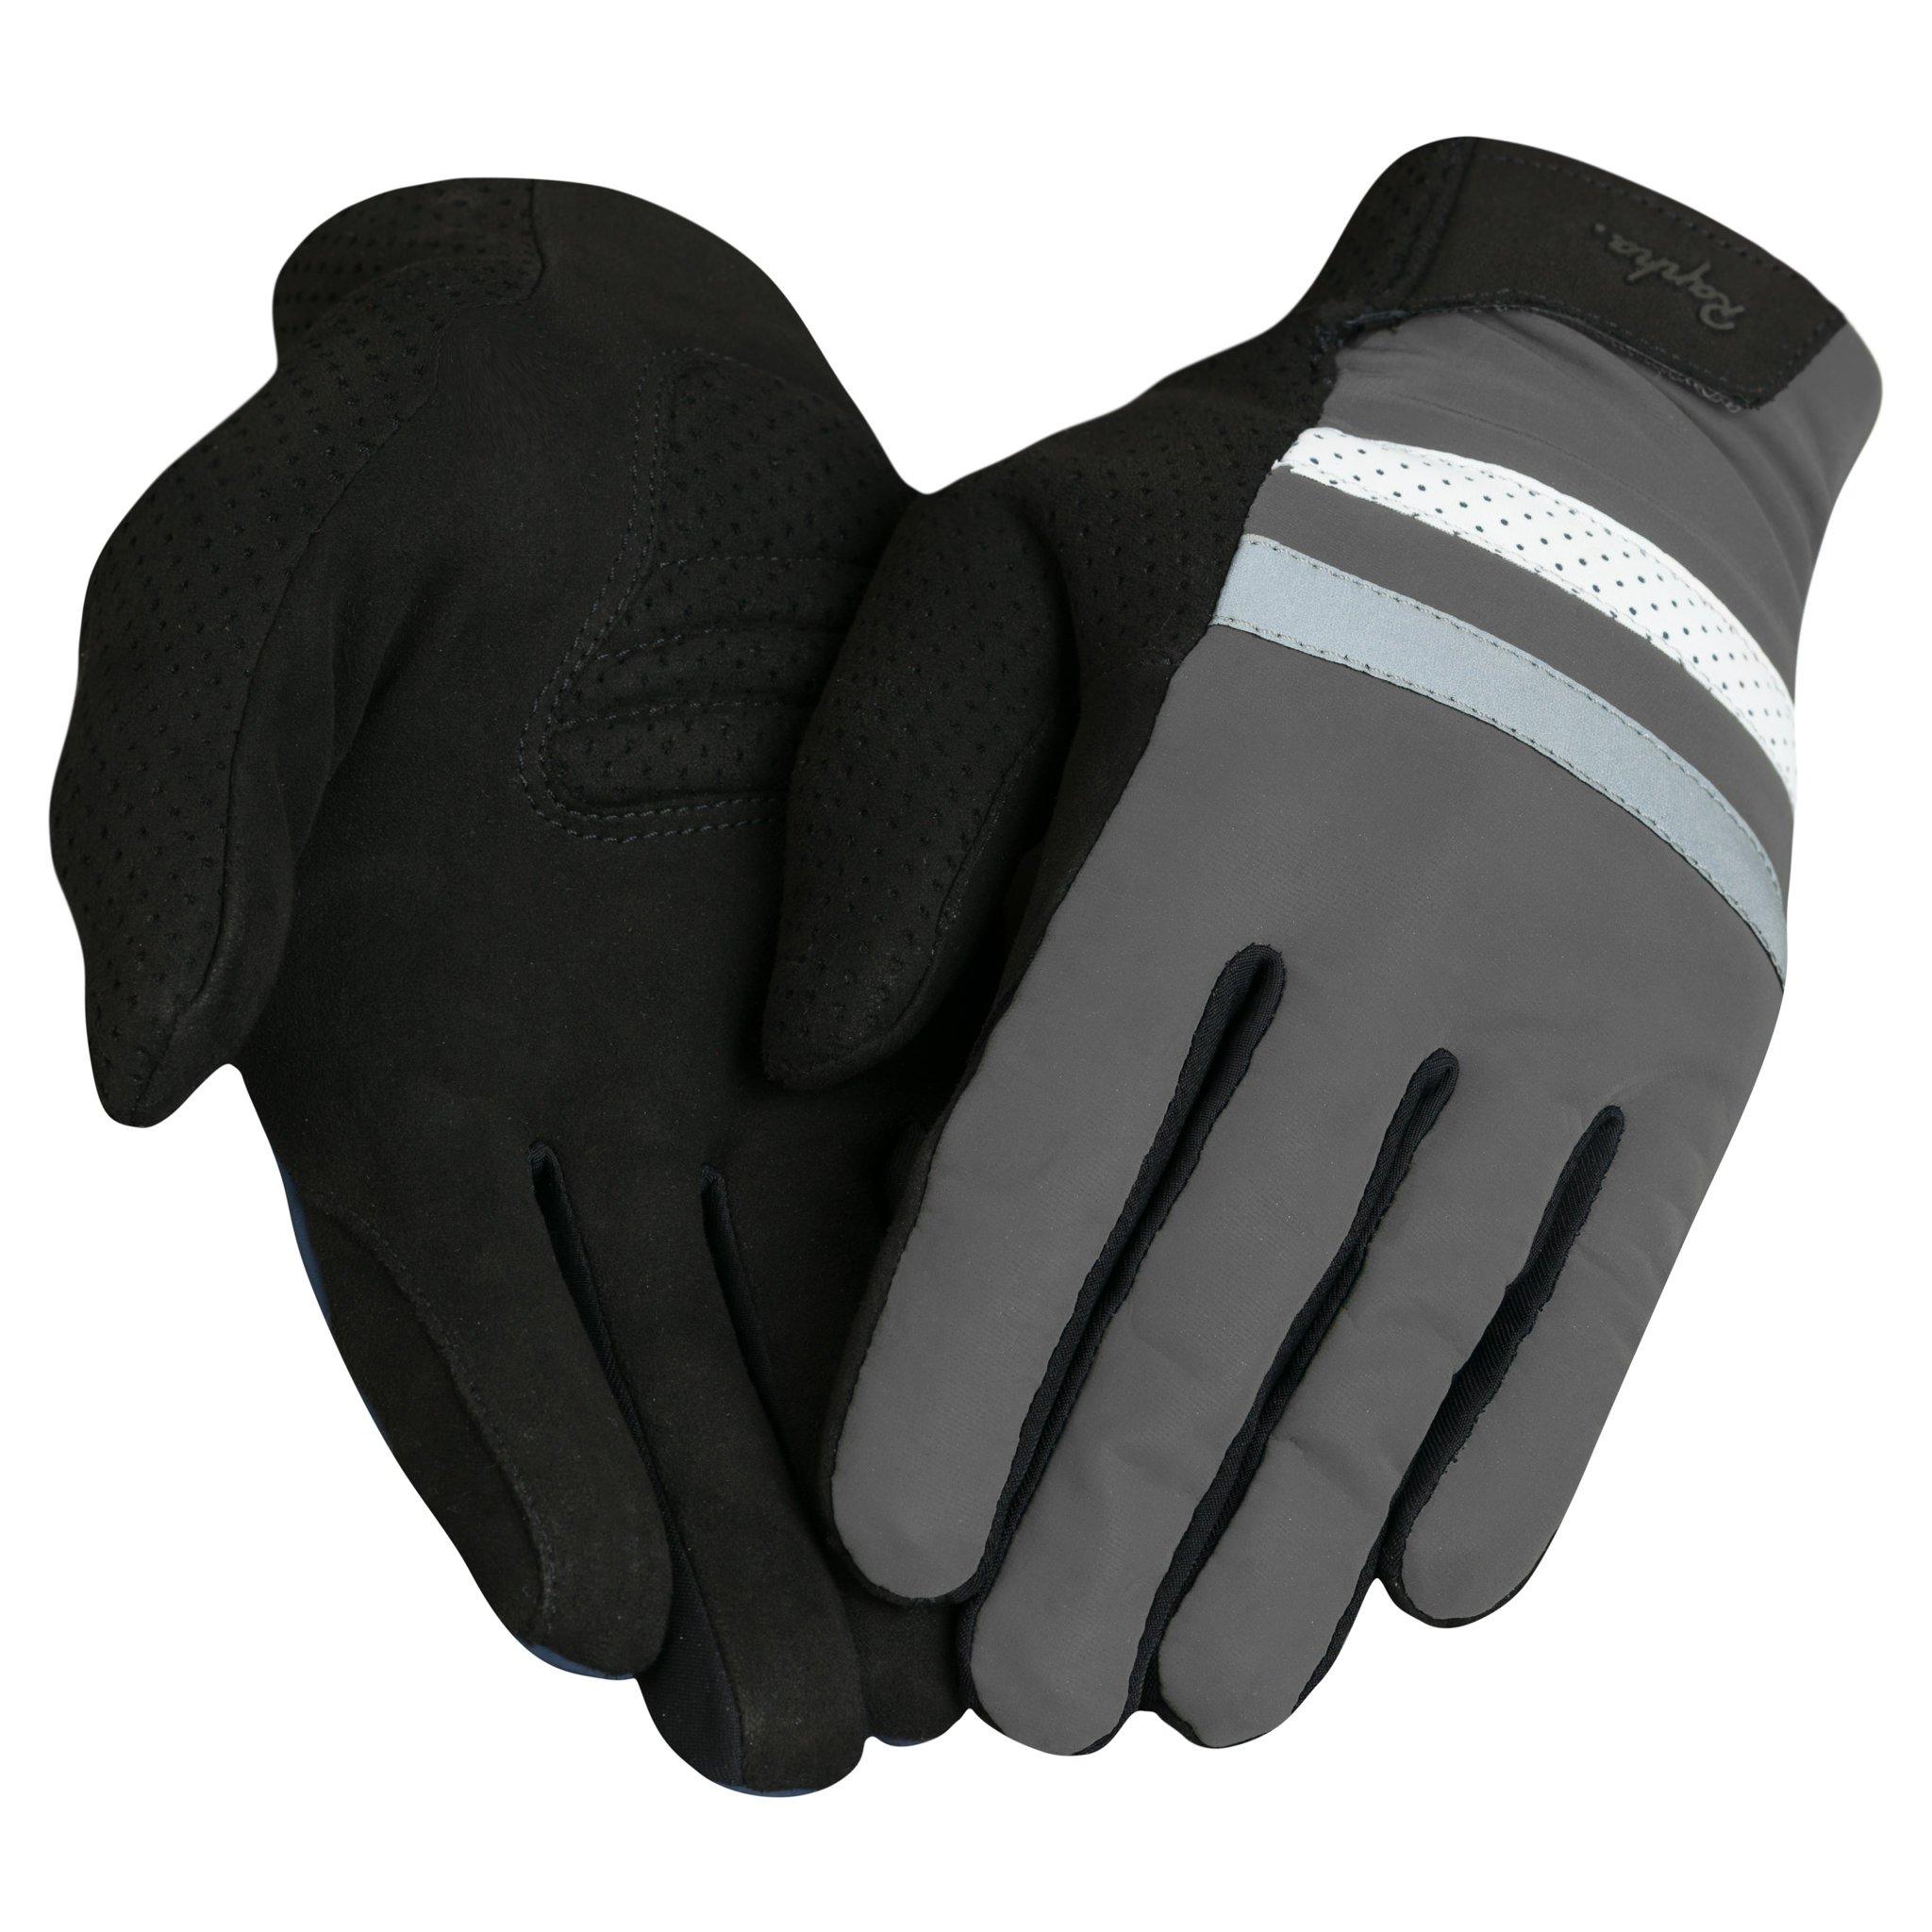 Rapha for Reflective Winter Men\'s Commuting Riding | Cycling and Brevet Gloves Reflective Gloves |